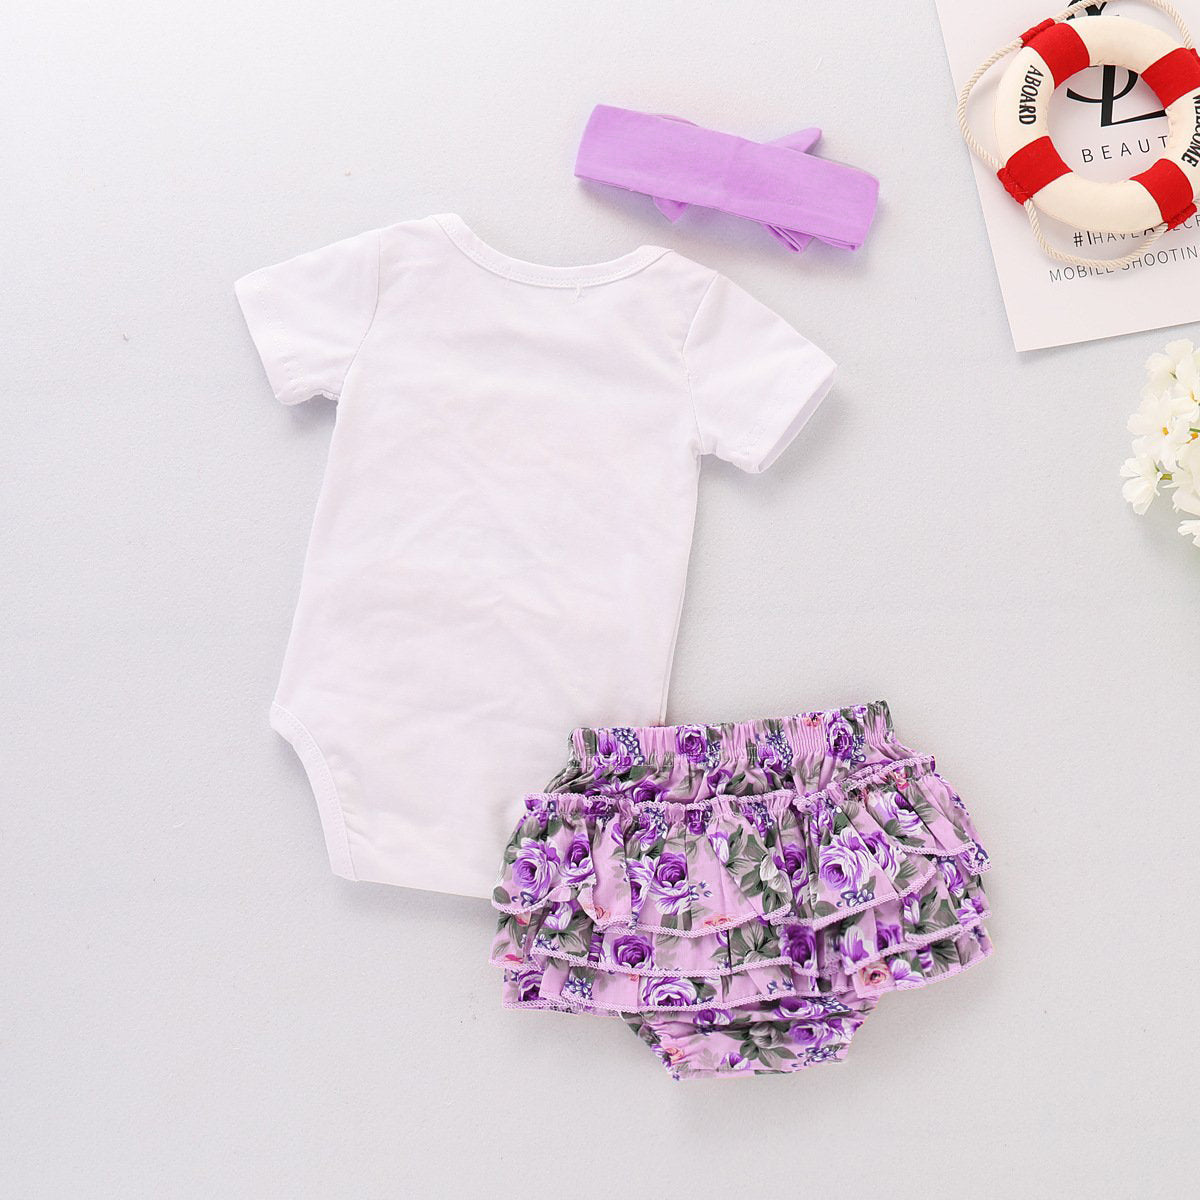 3PCS Daddy's Girl Mommy's World Floral Printed Baby Set